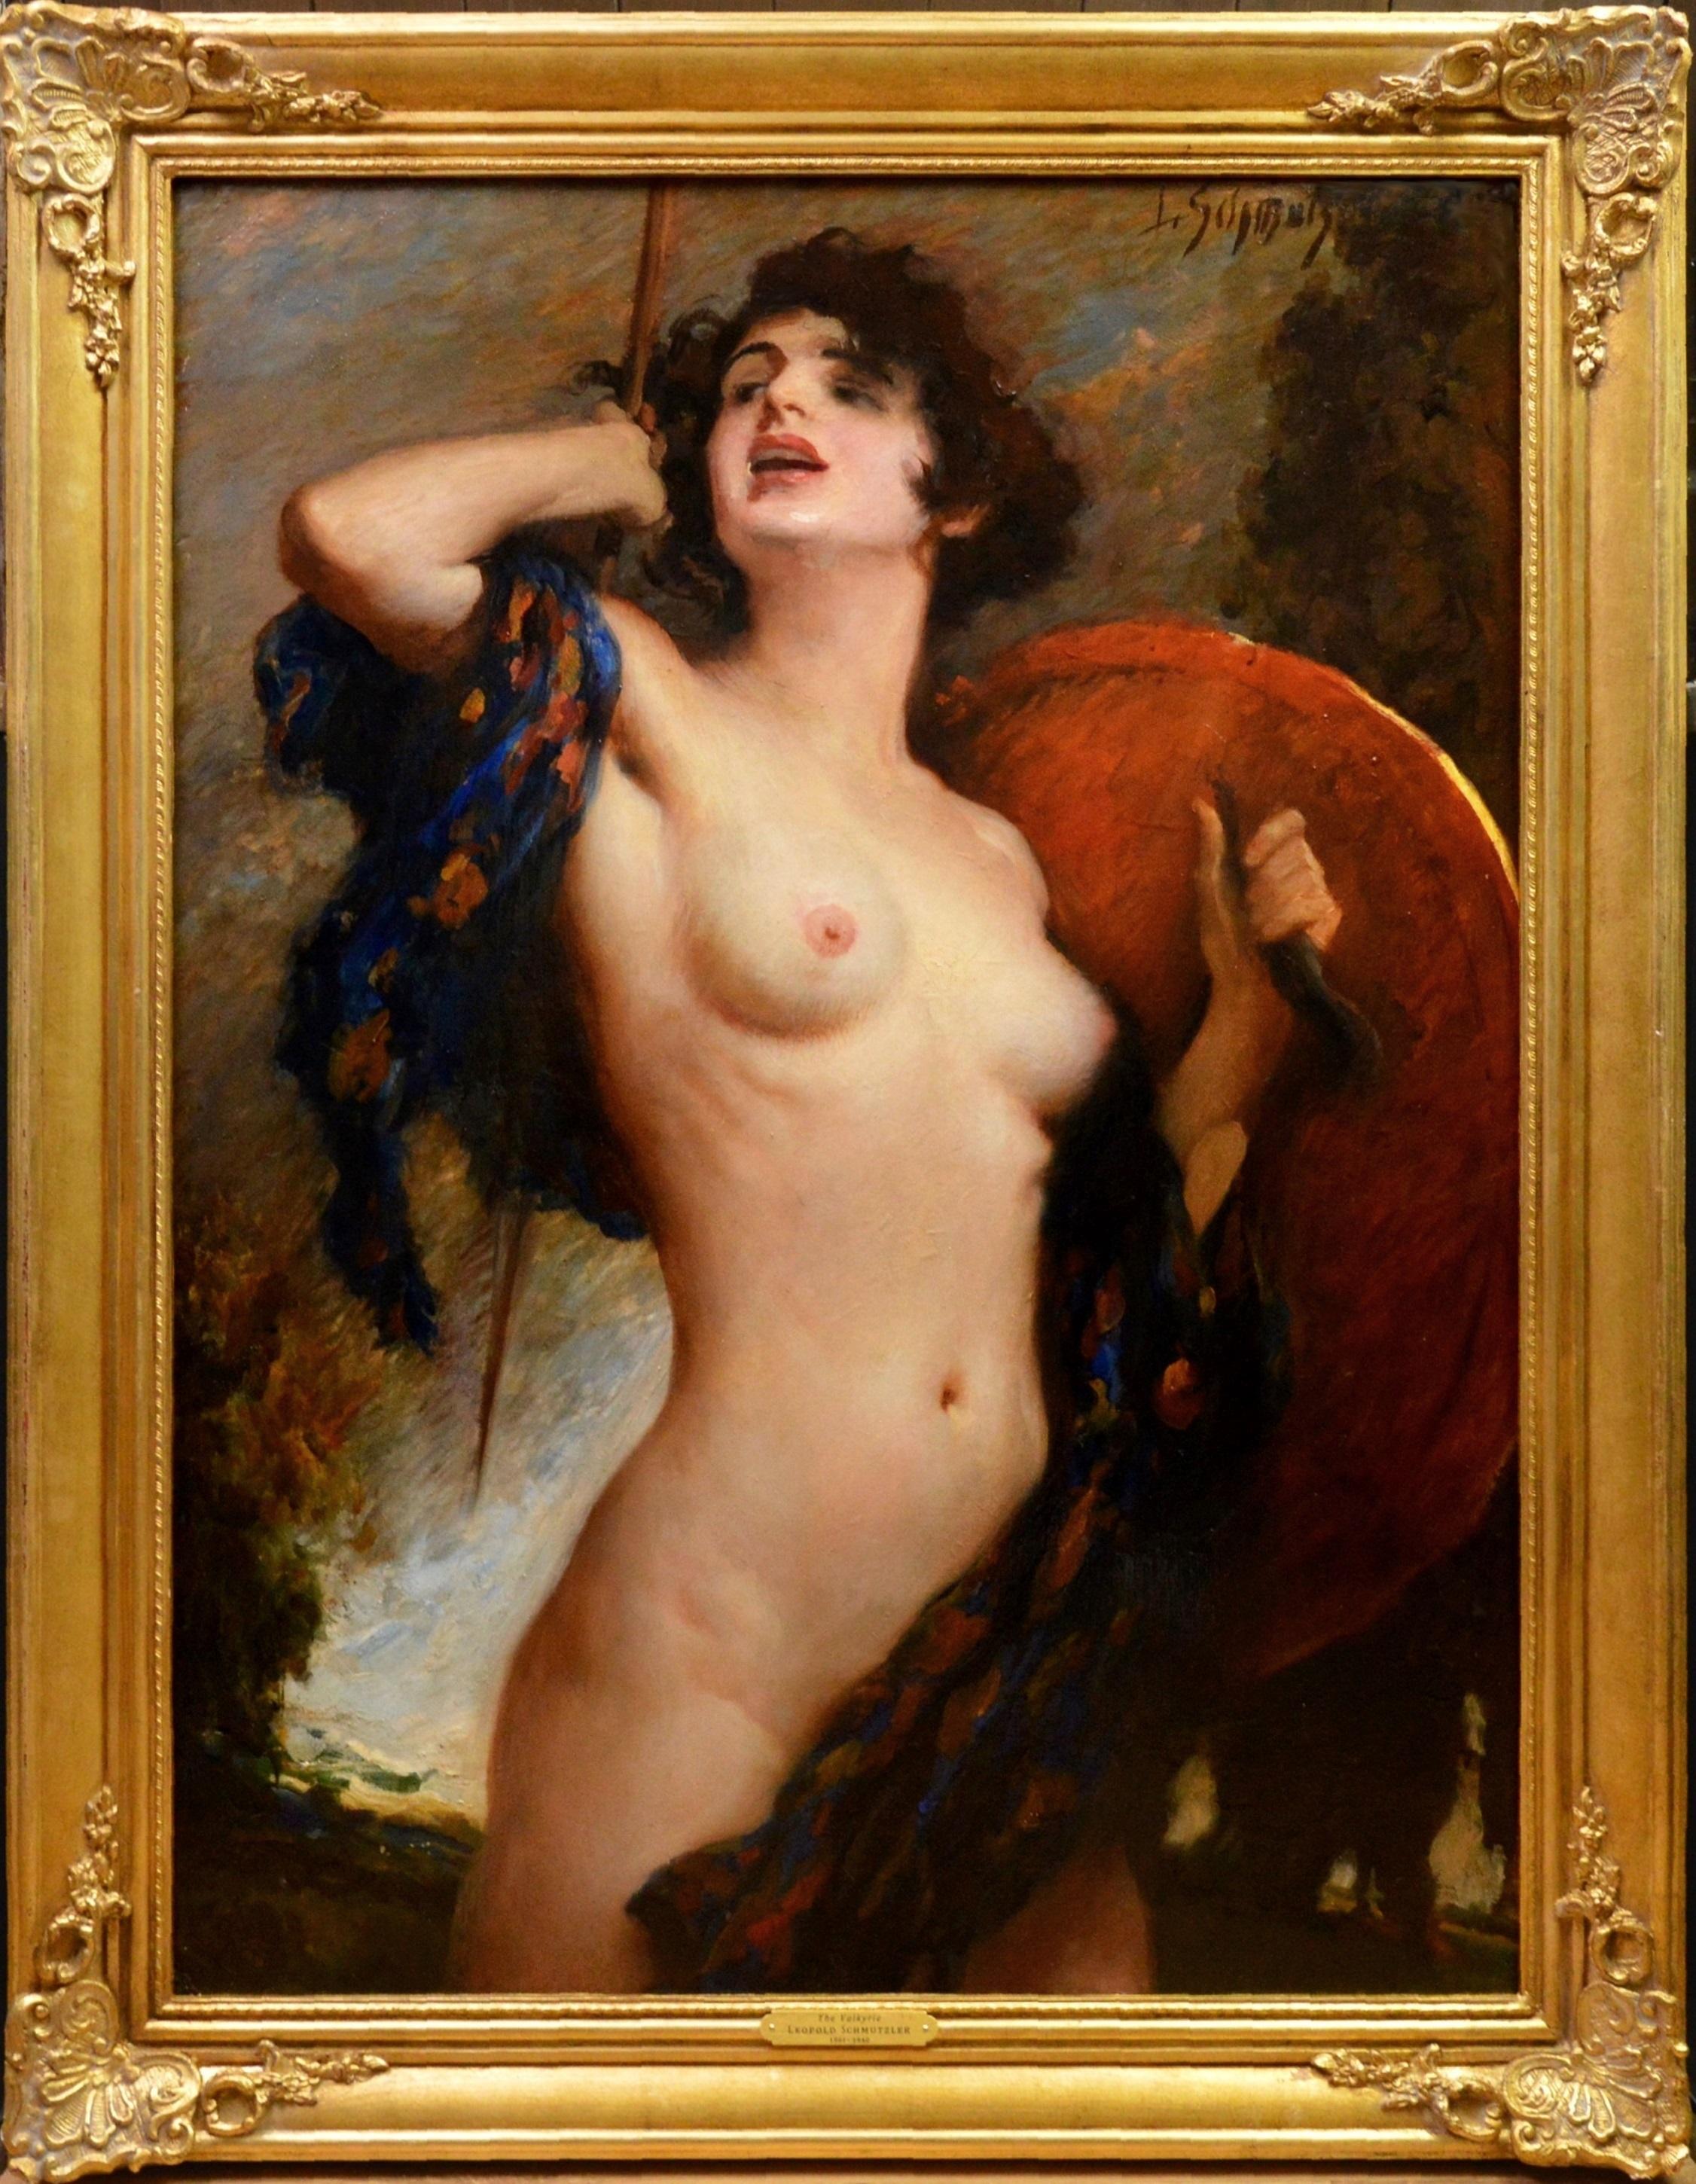 Leopold Schmutzler Figurative Painting - The Valkyre - Very Large 19th Century Nude Oil Painting - Female Warrior Goddess